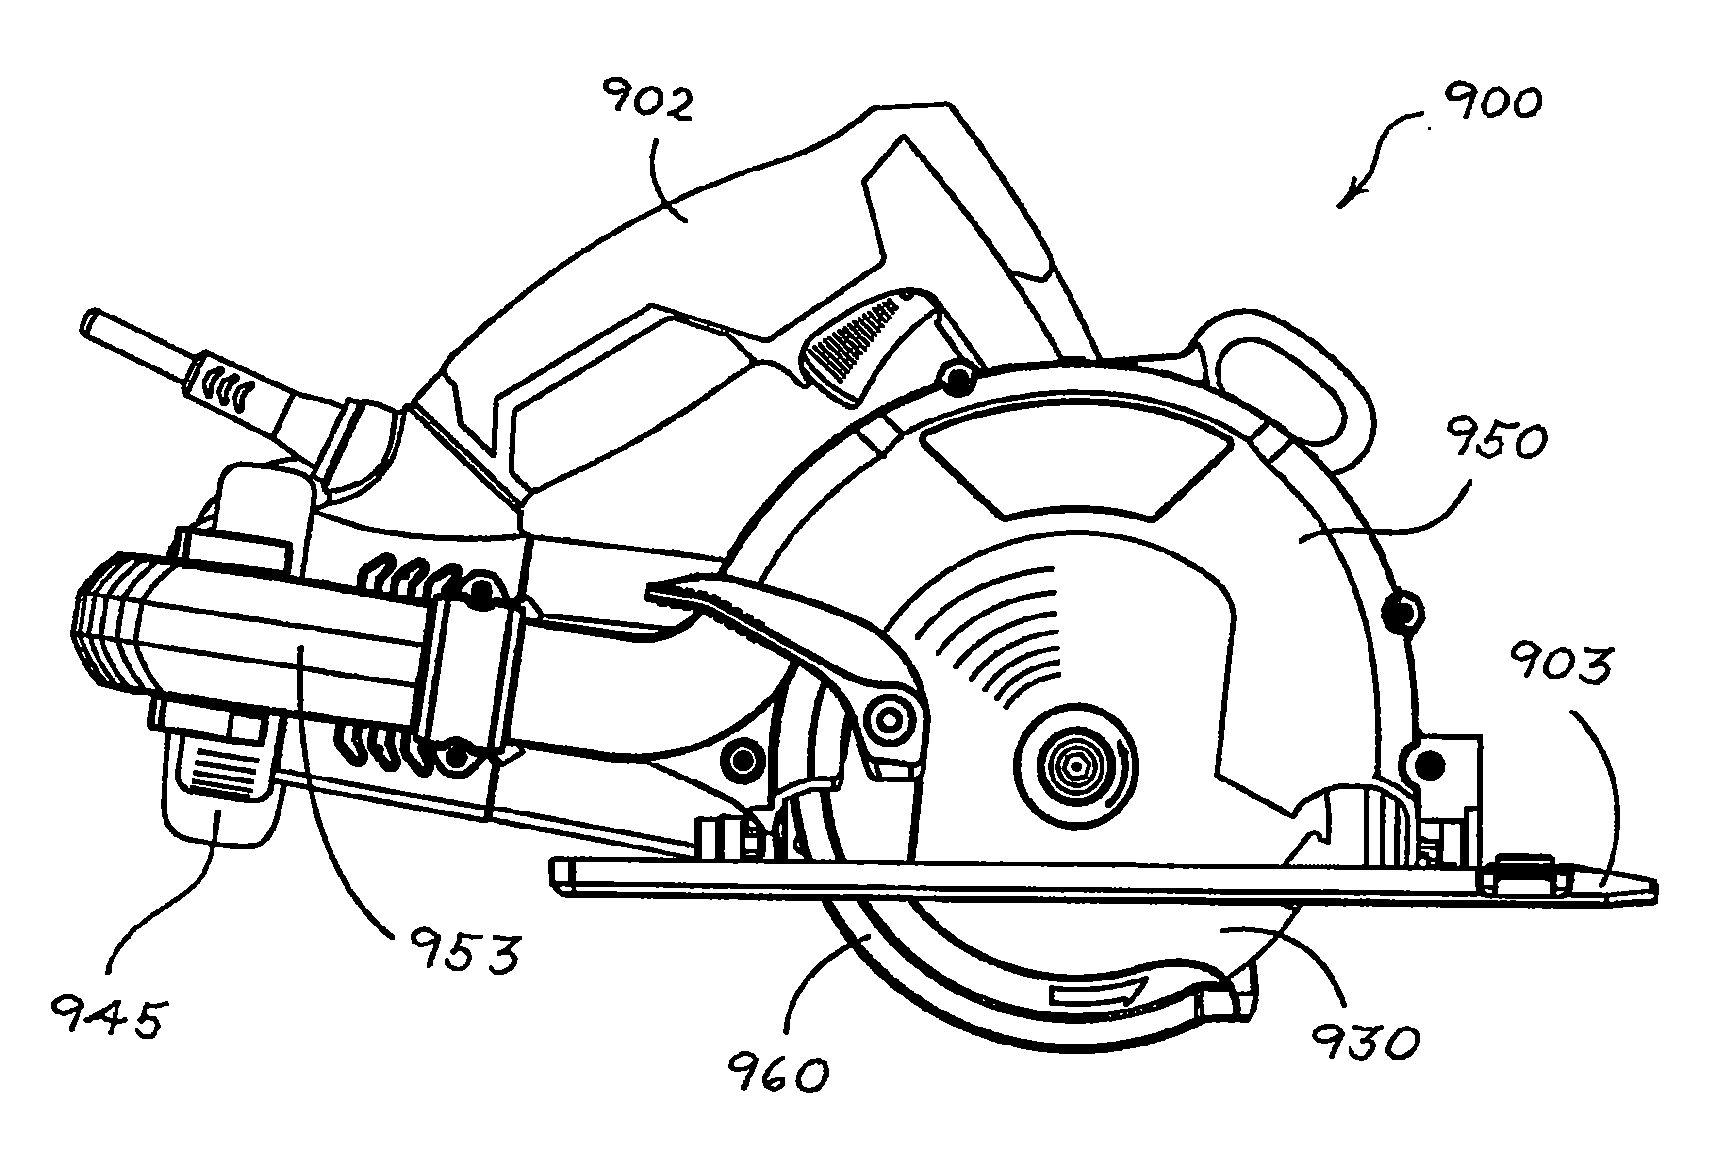 Blade Guard for Power Tool Having an Evacuation System